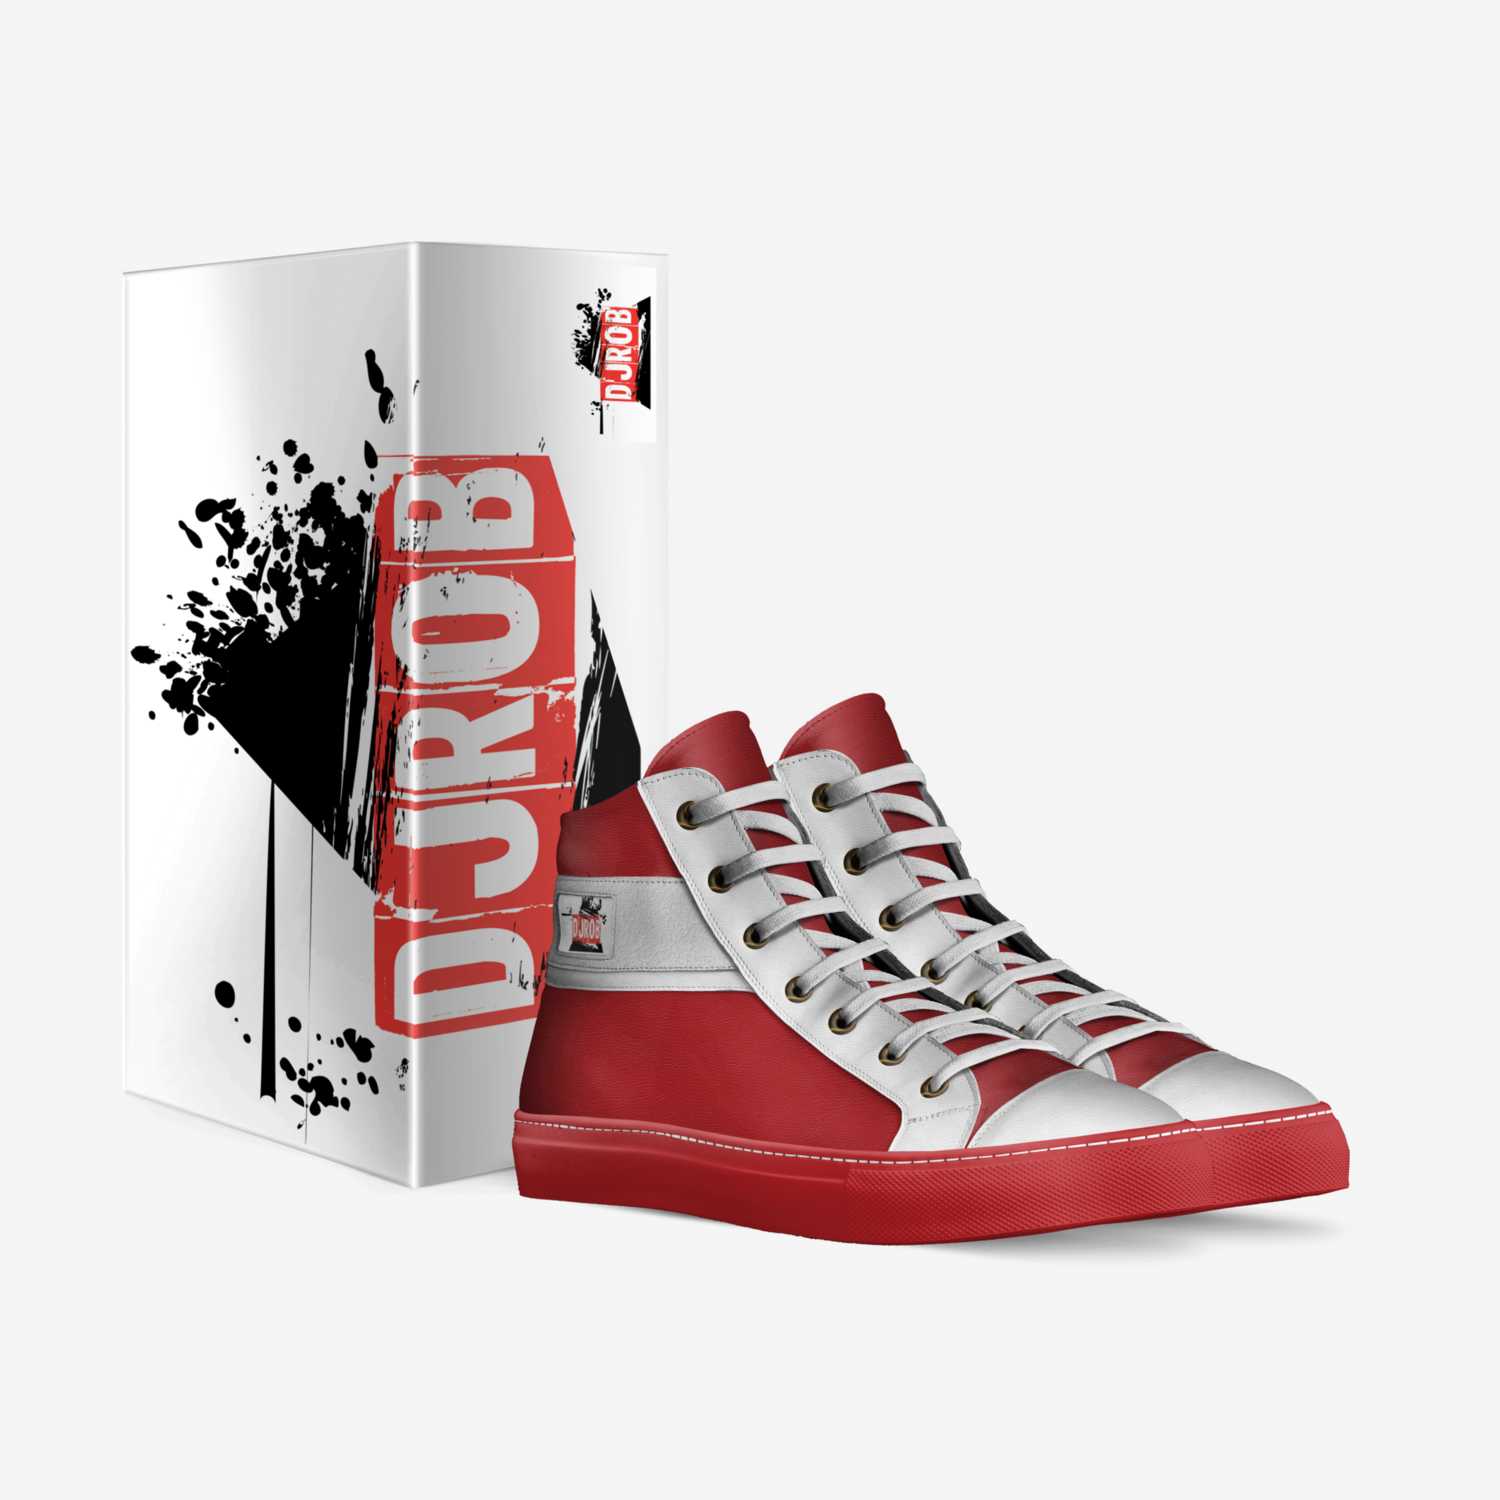 DJ Rob Design custom made in Italy shoes by James Robinson | Box view